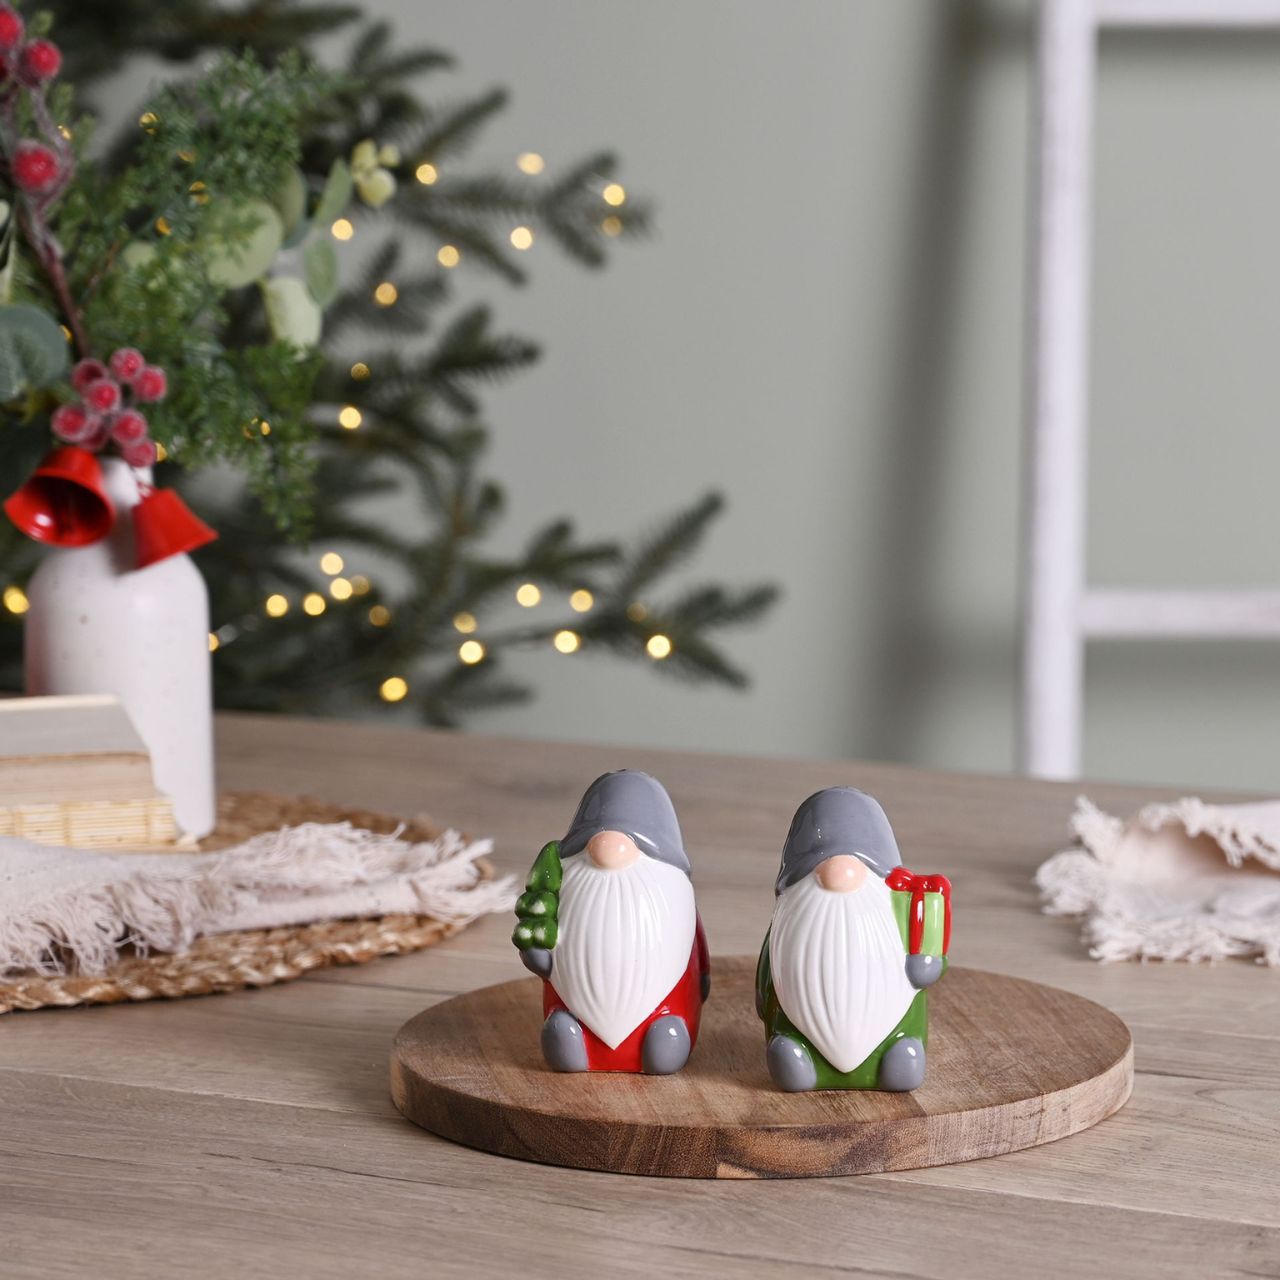 Gonk Salt and Pepper Shakers Set  A Gonk salt and pepper shaker set by THE SEASONAL GIFT CO.  This adorable pair of shakers will enhance dining tables throughout the festive period.